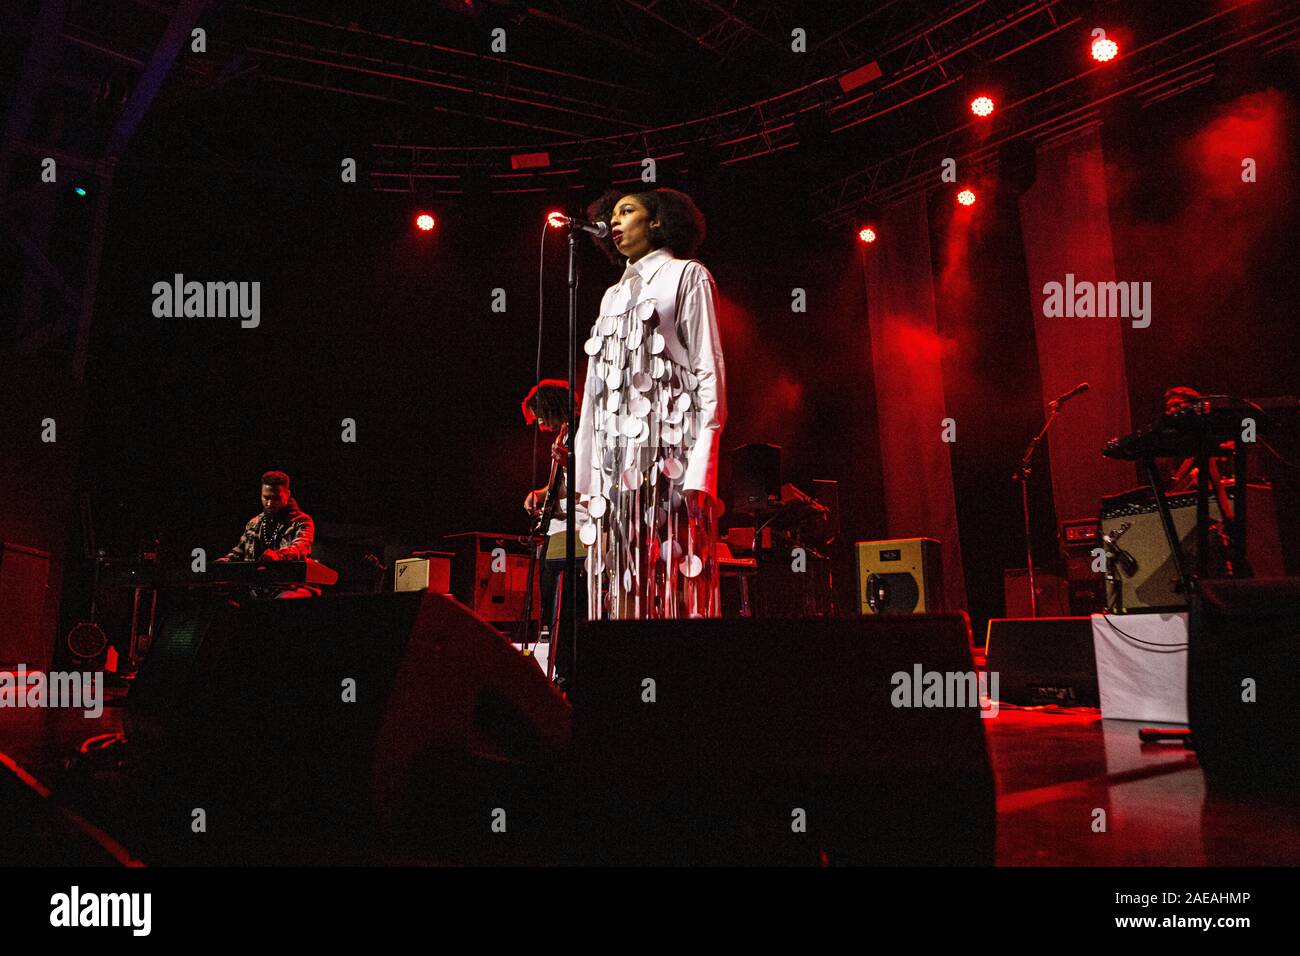 Milan Italy. 07 December 2019. The American/British singer and songwriter Celeste Epiphany Waite known mononymously as CELESTE performs live on stage at Fabrique opening the show of Michael Kiwanuka. Stock Photo